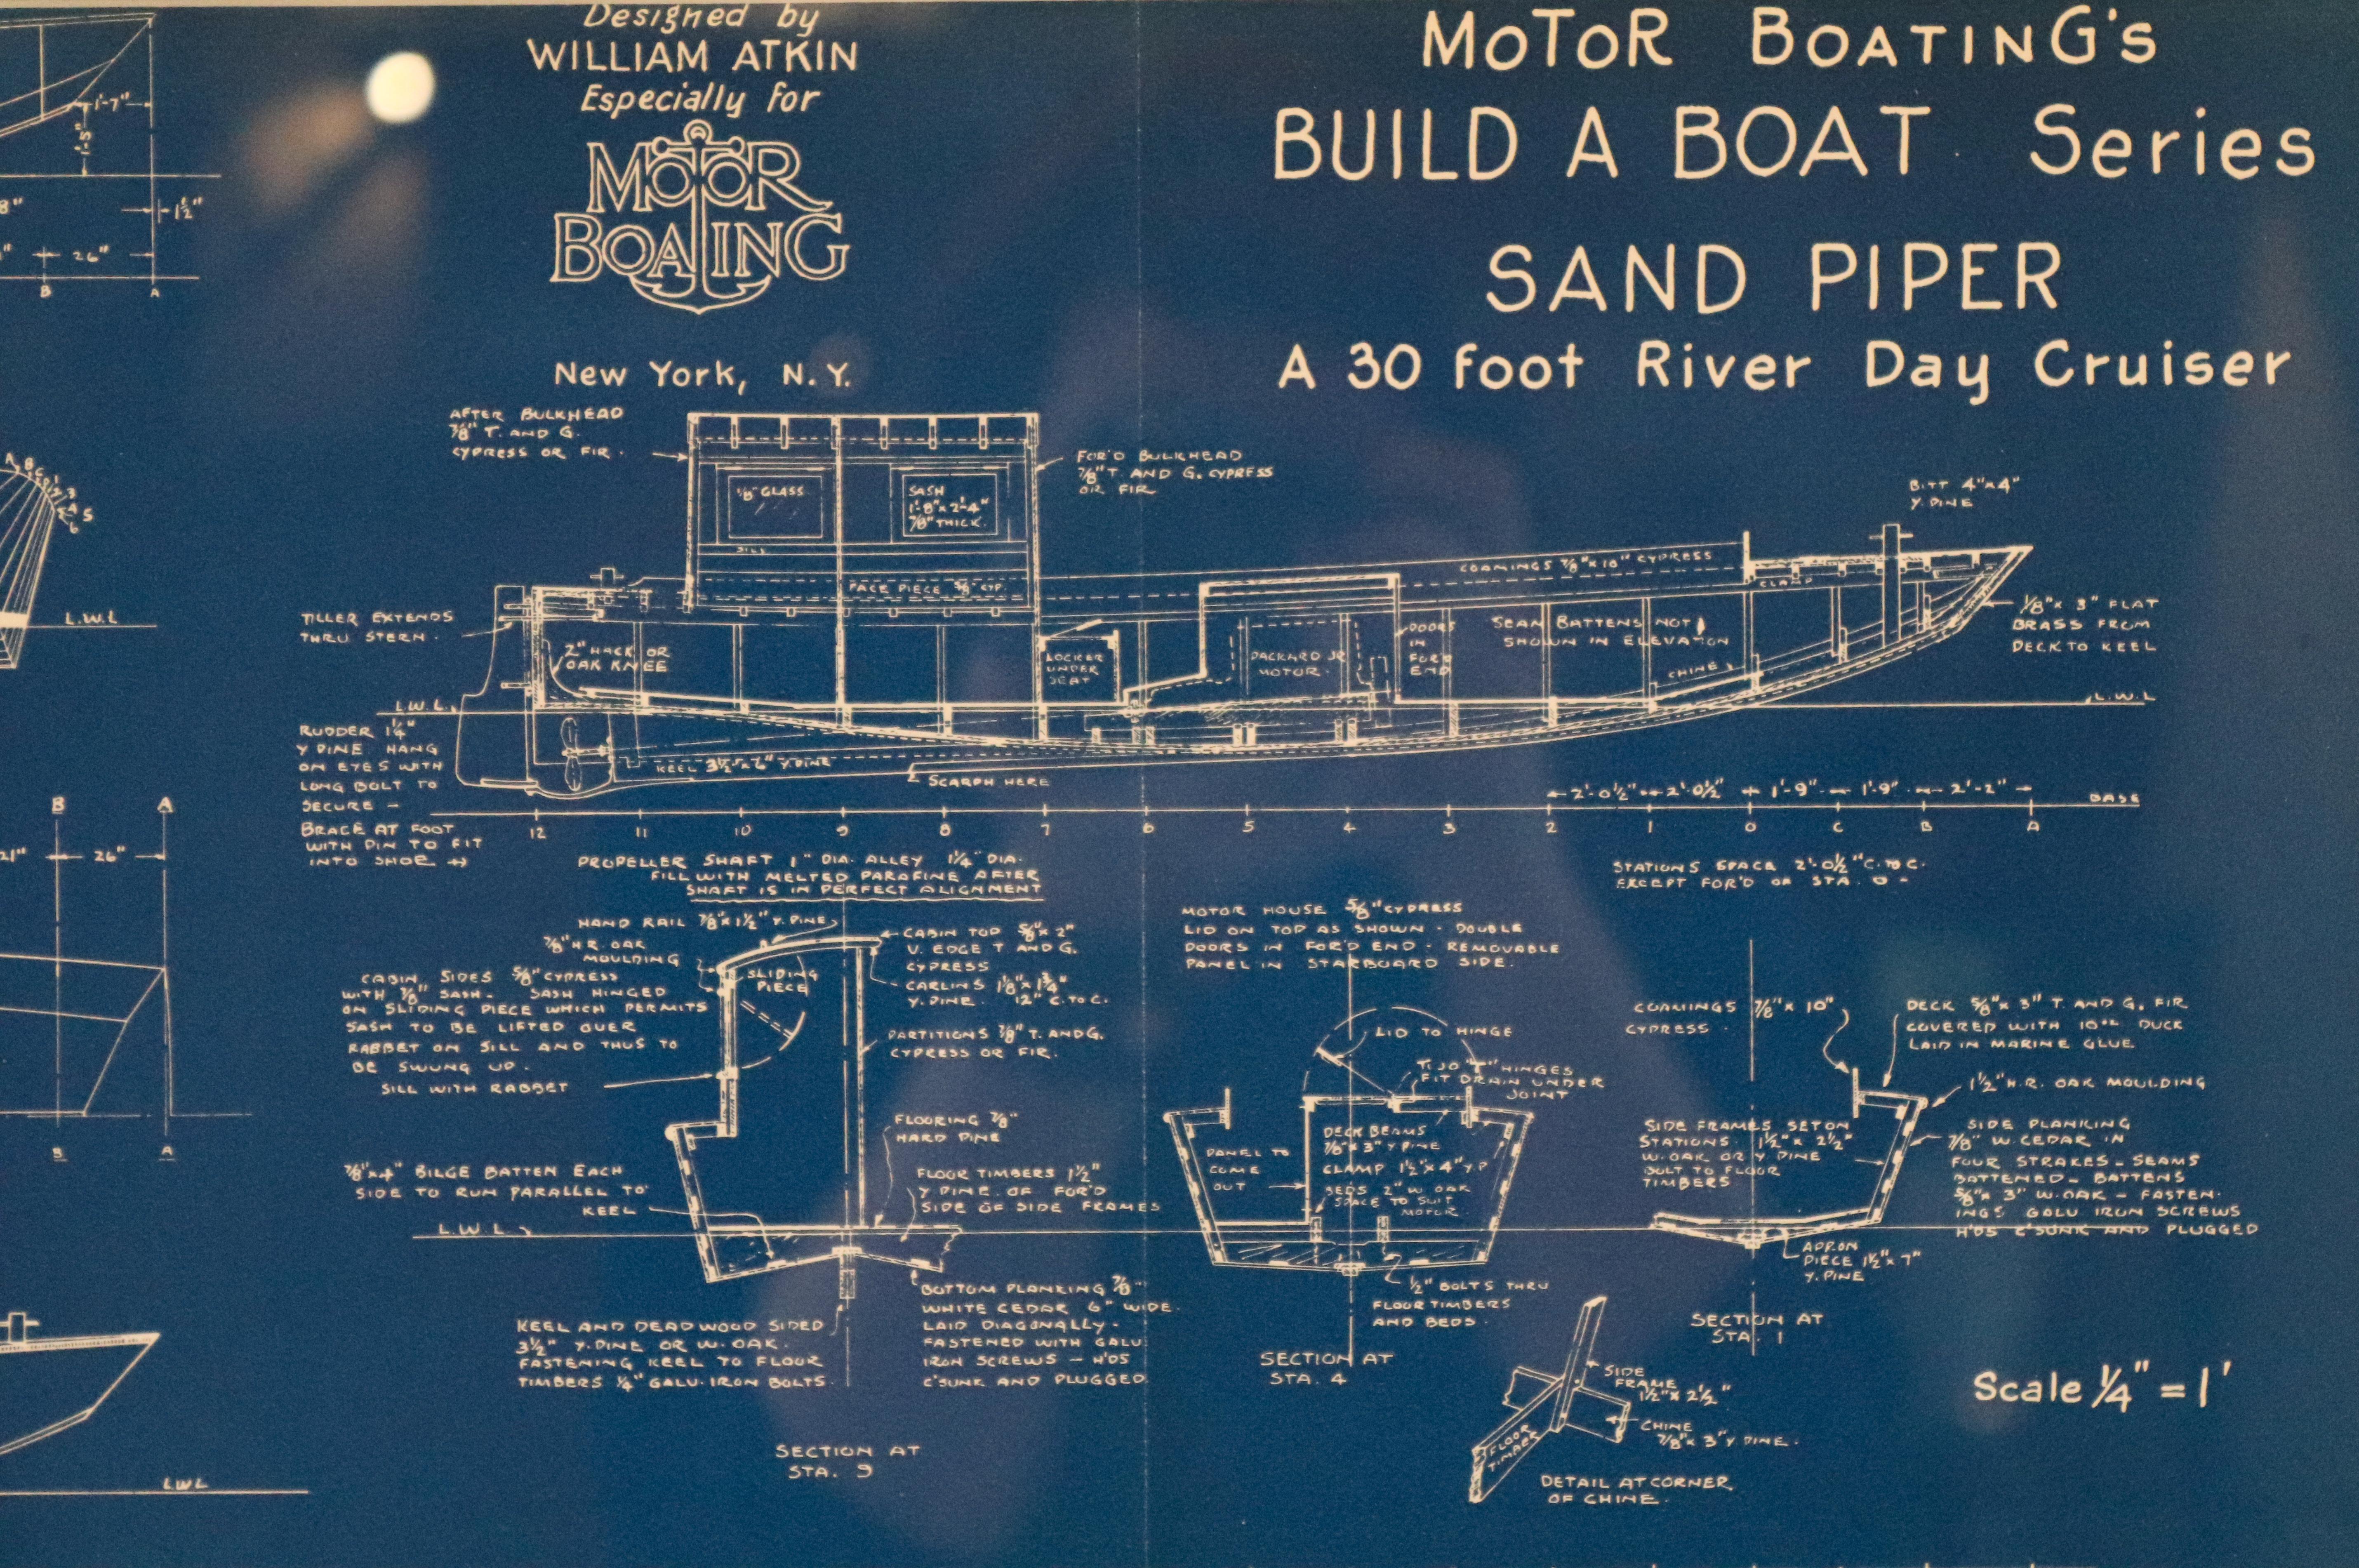 Original nautical blueprint drawing published by Motor Boating Magazine. Showing the 30foot river day cruiser 